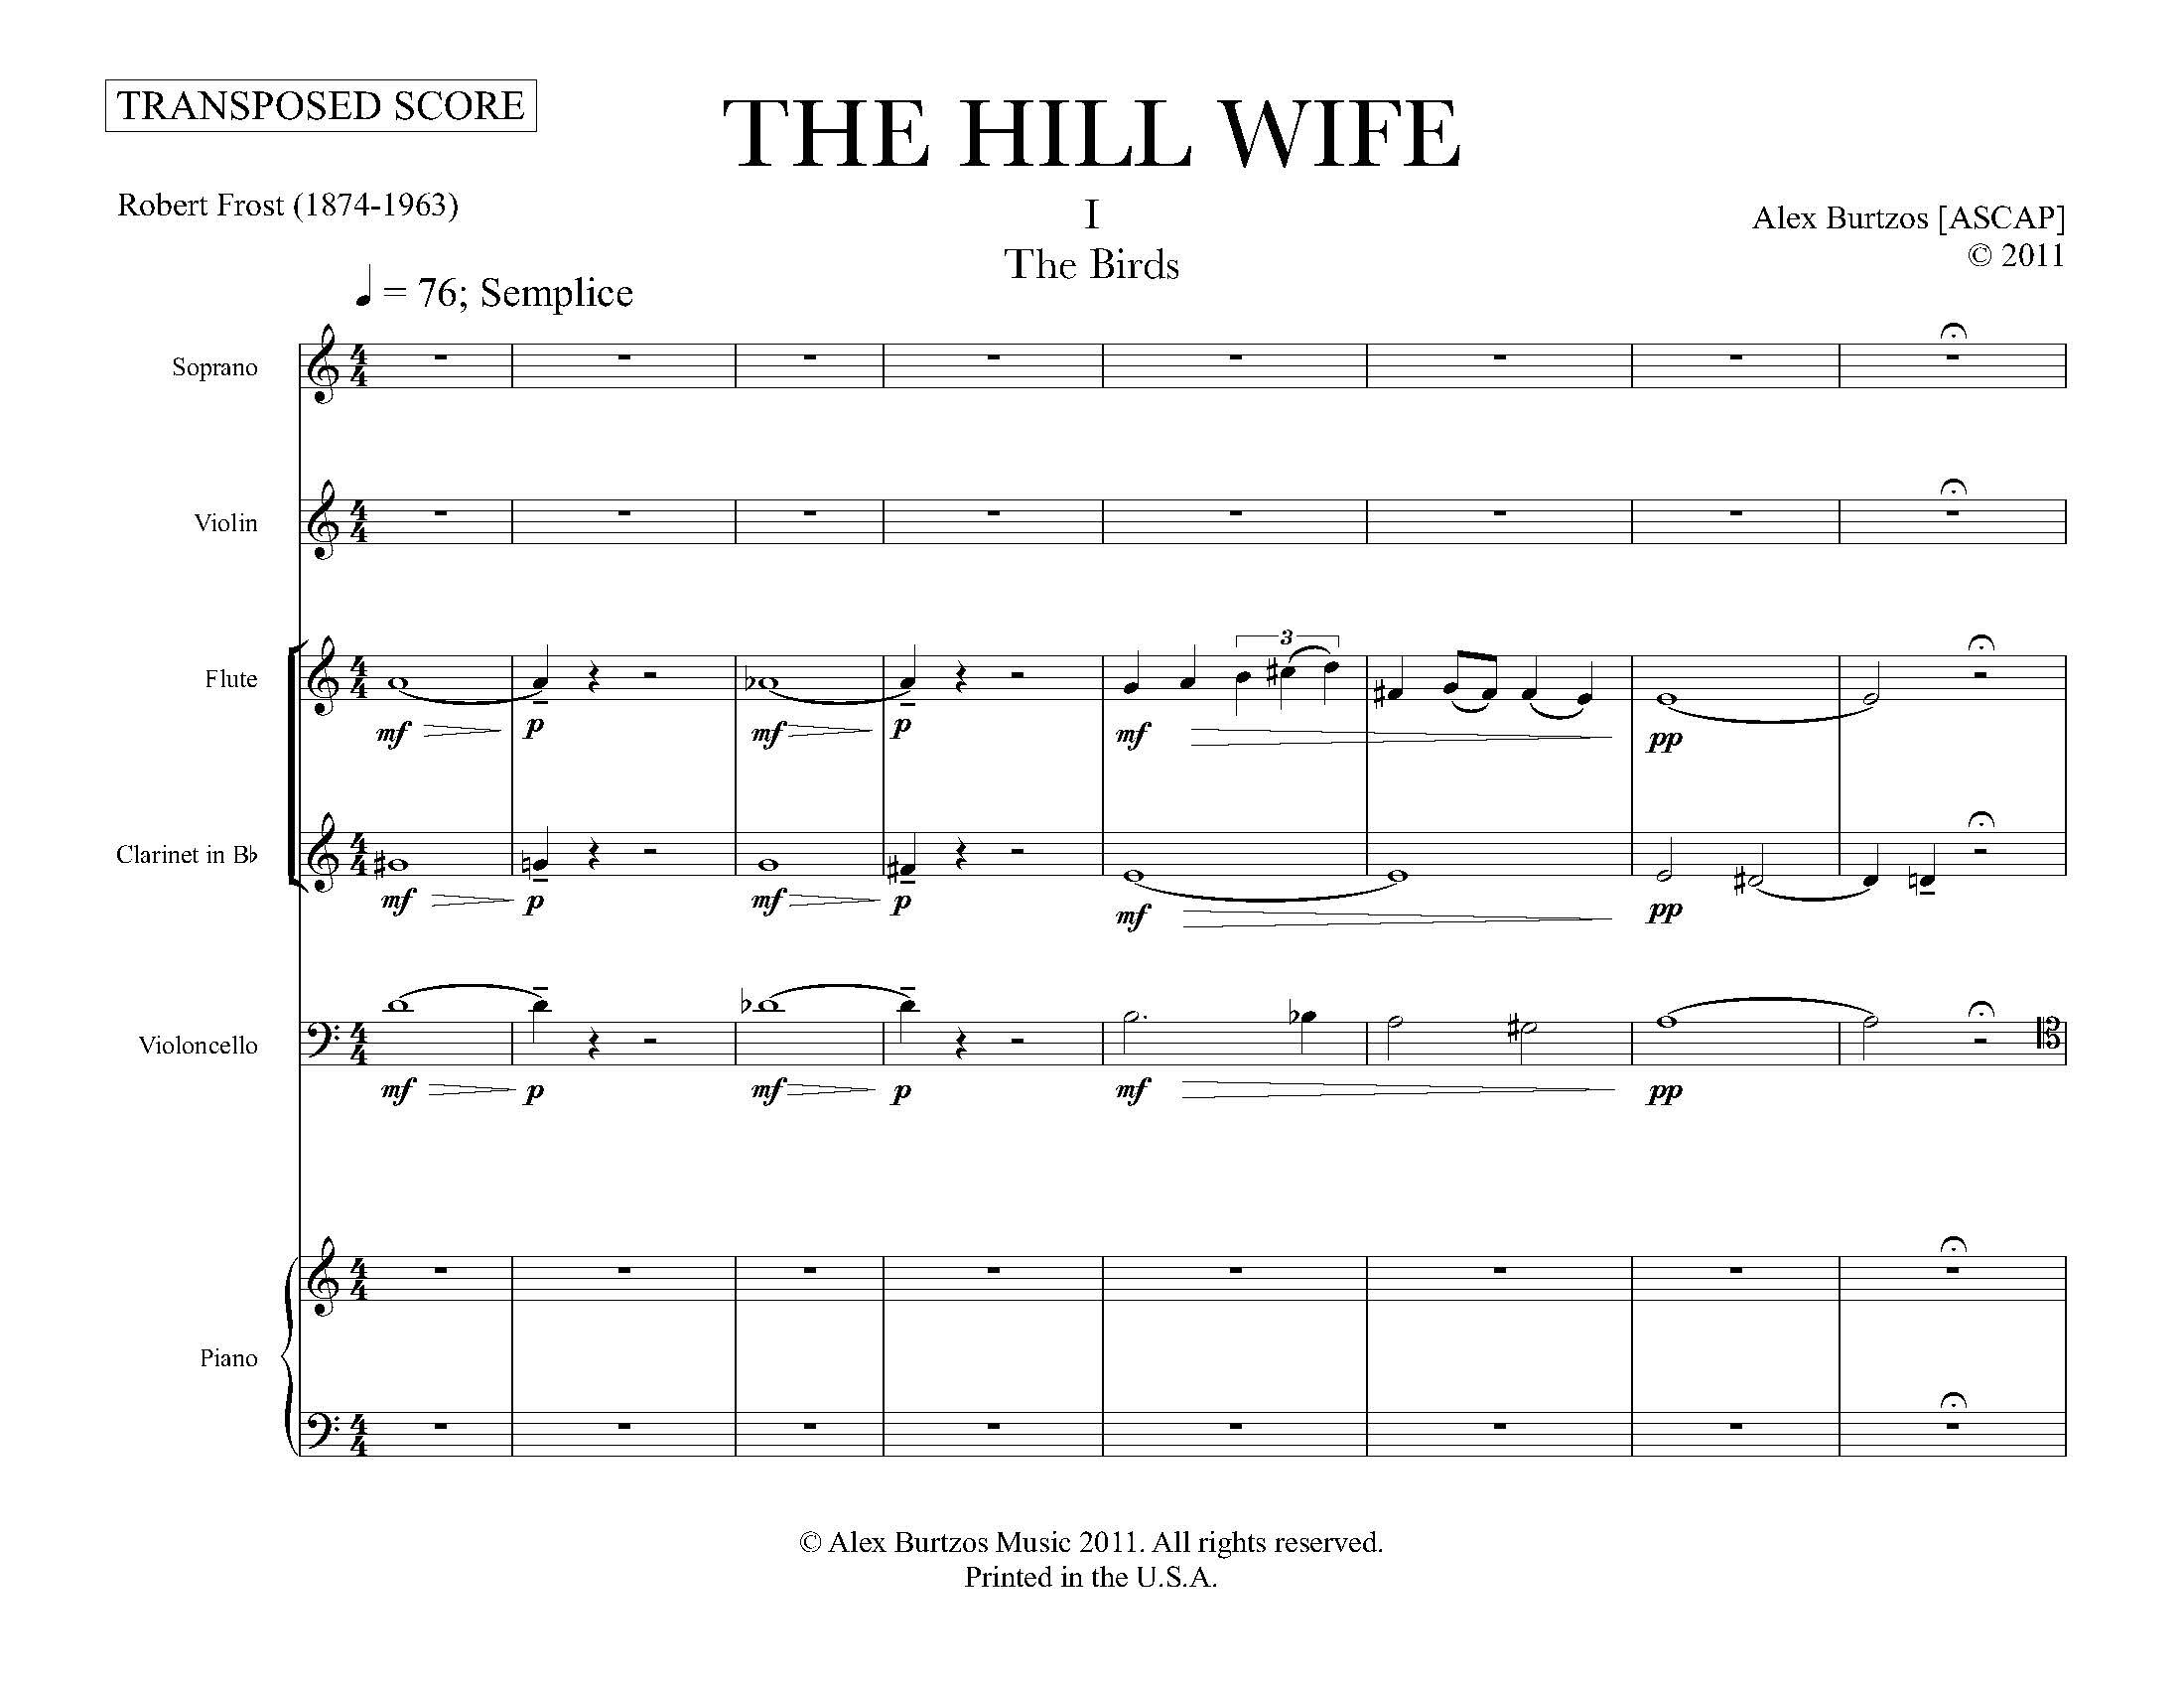 The Hill Wife - Complete Score_Page_009.jpg